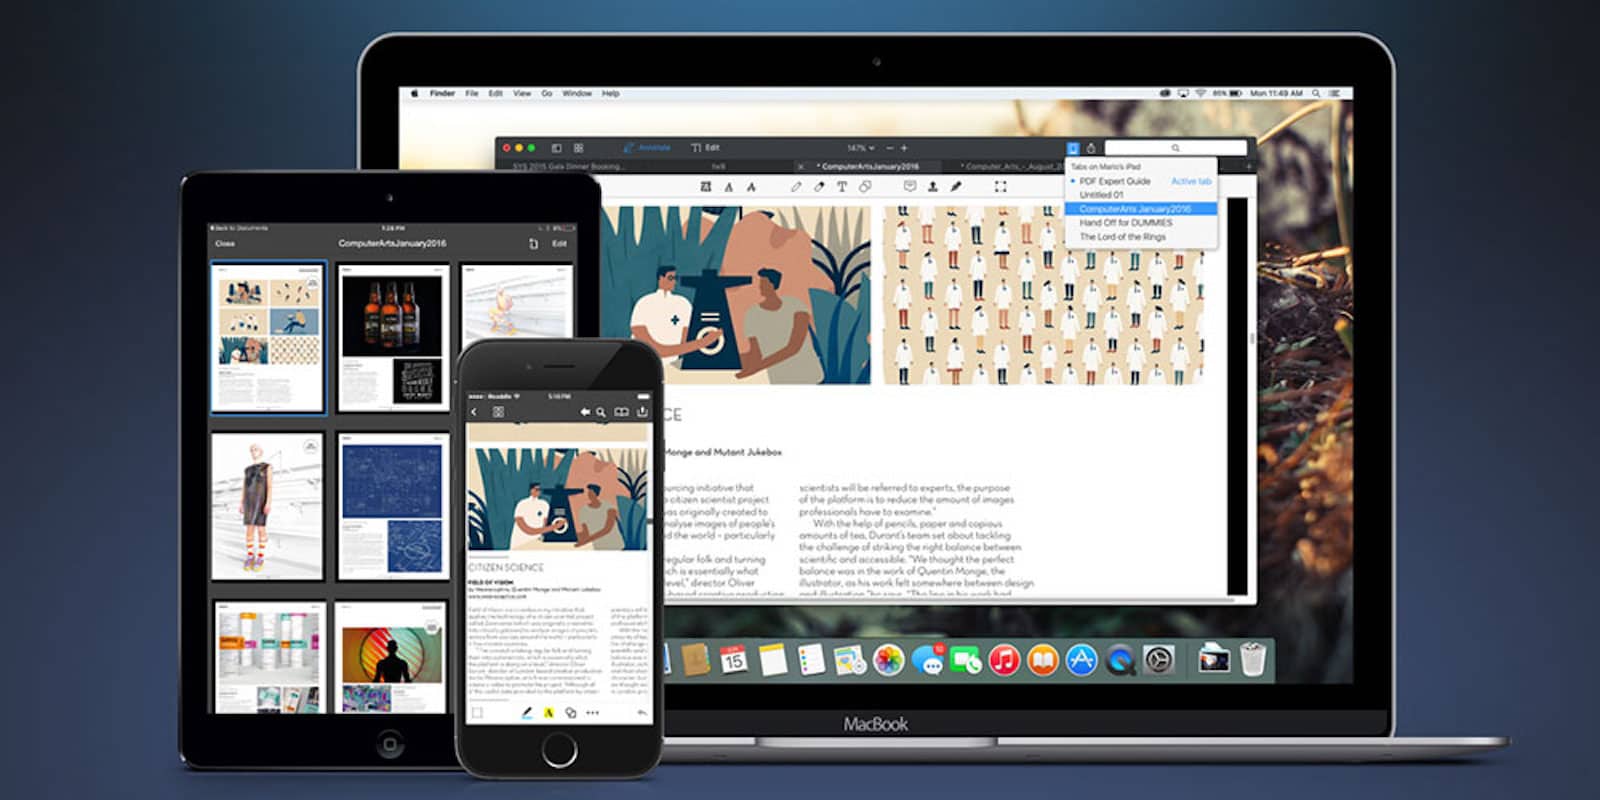 Make PDFs into putty in your hands with this award winning editing app.